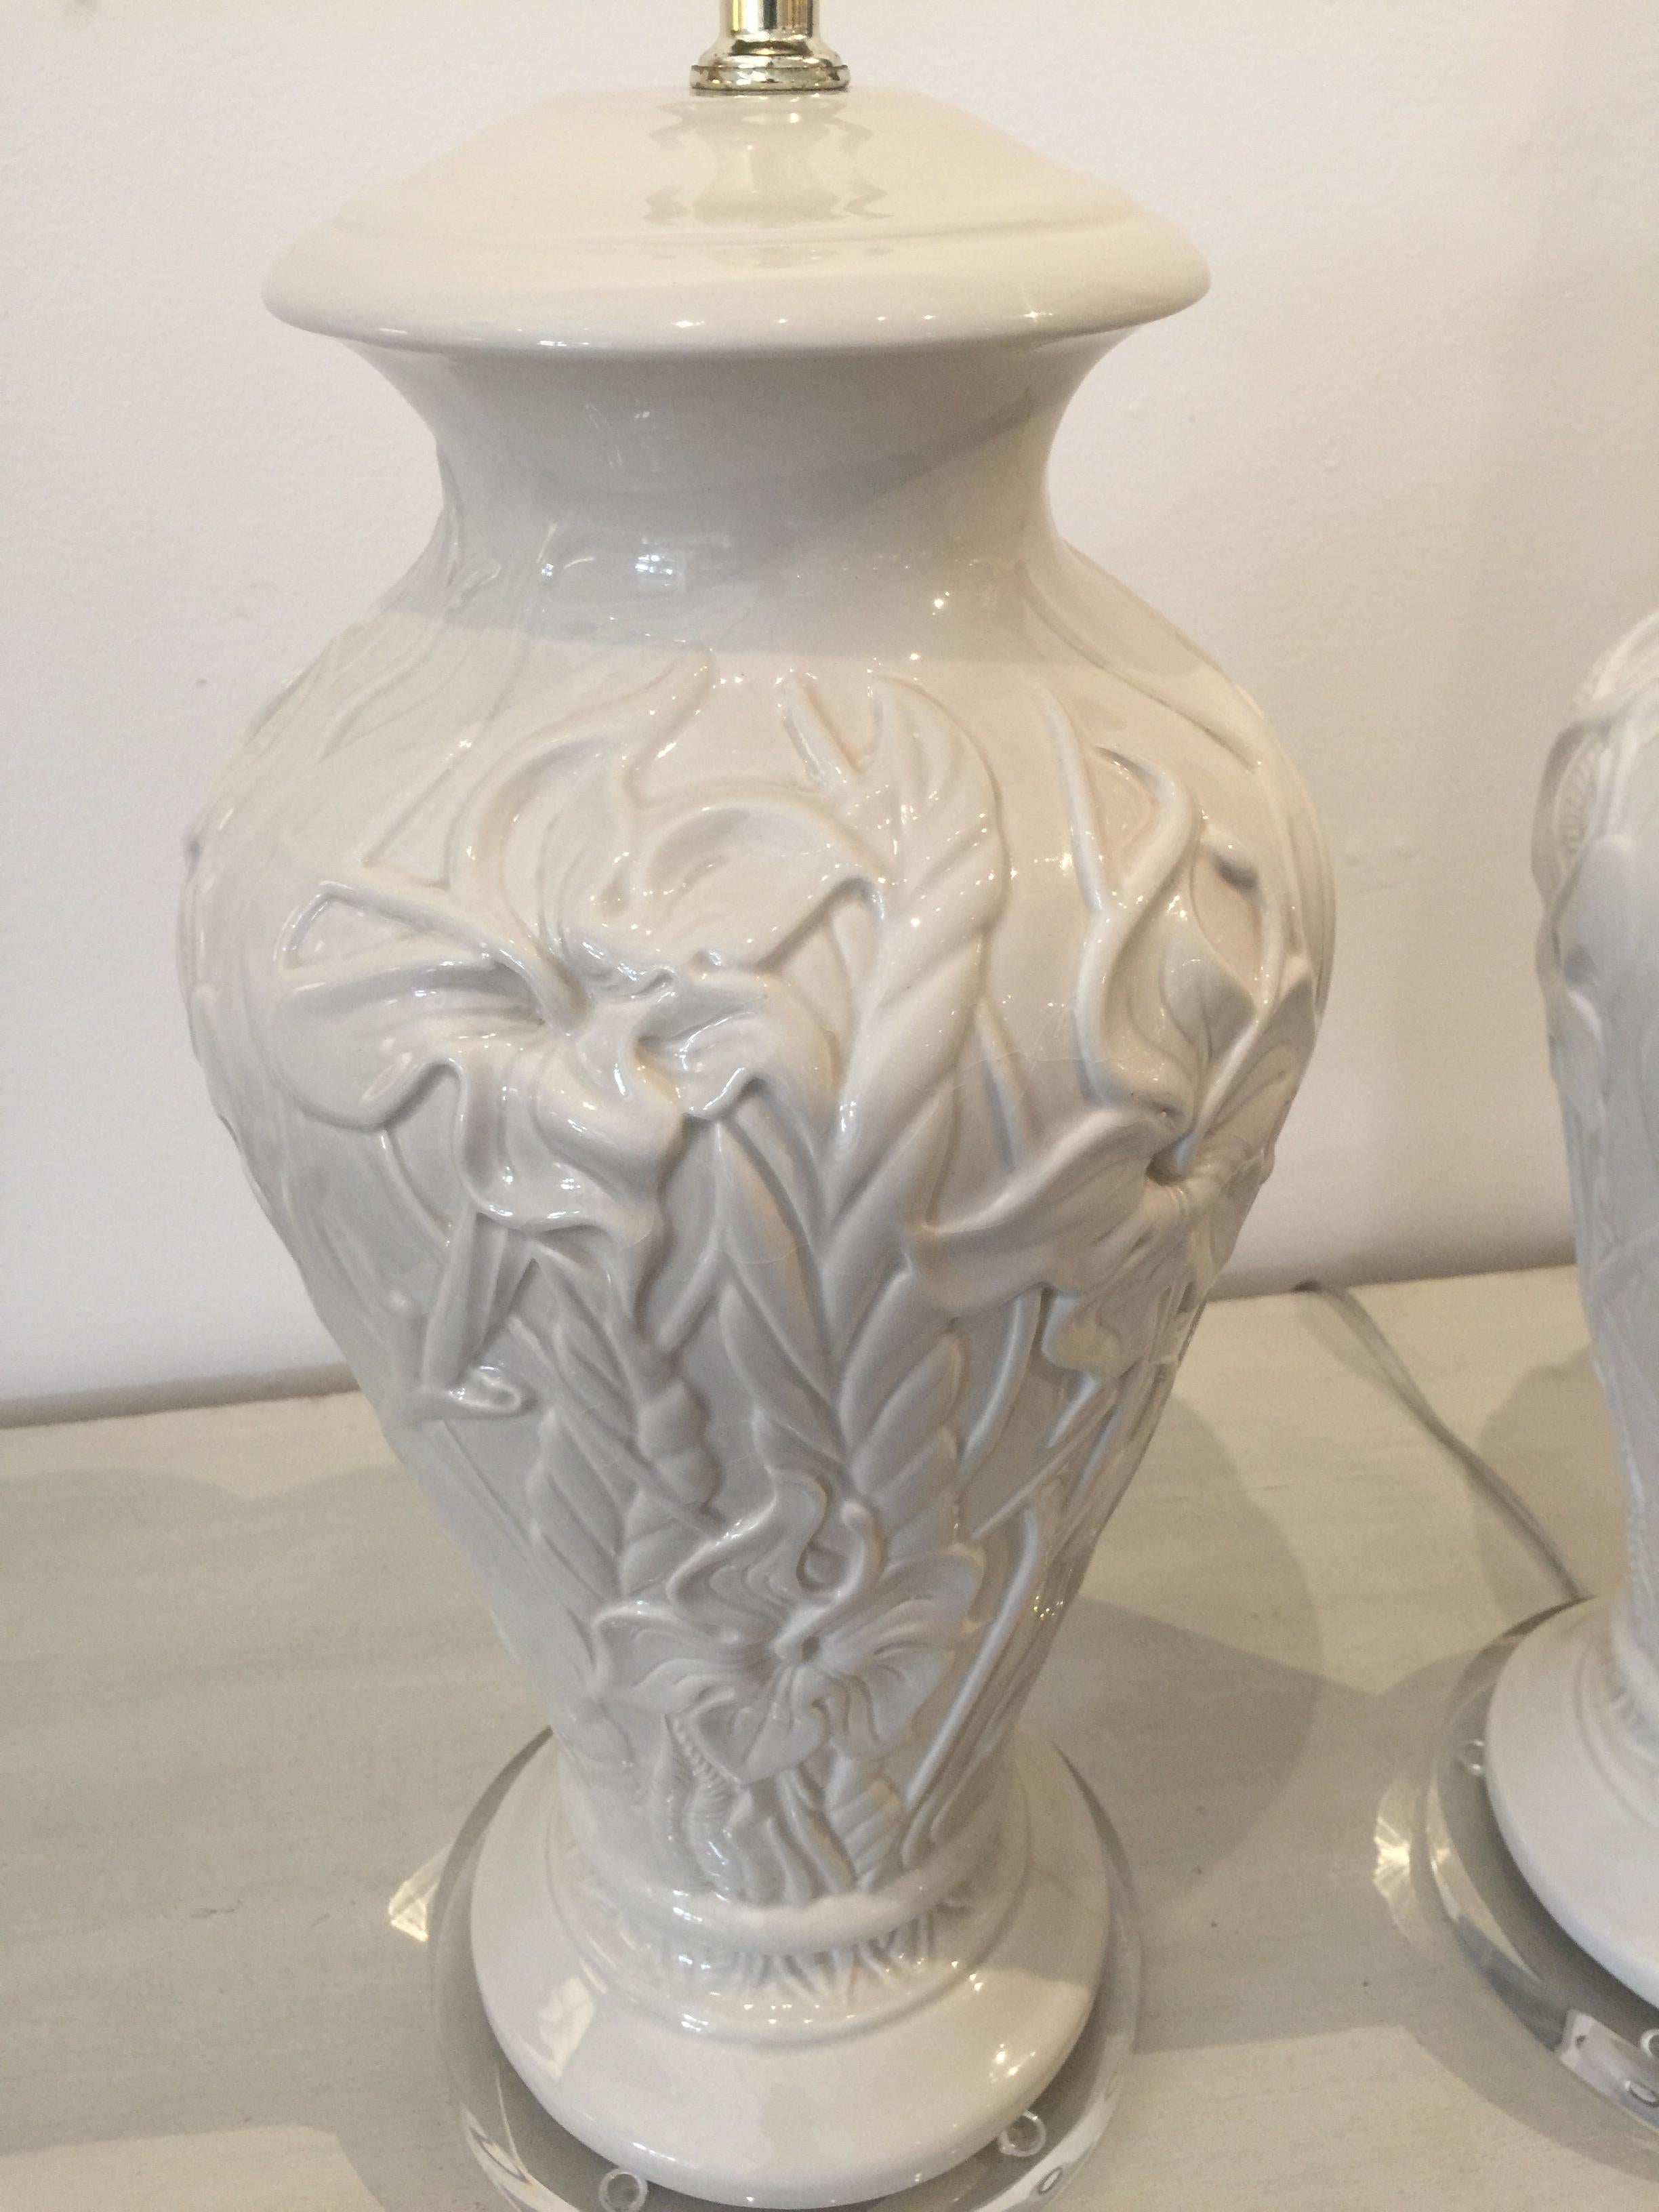 Pair of white table lamps with raised floral pattern of lilies.
The lamps have been rewired and are UL listed.
Not recommended to use more than 150 watts.
The Lucite bases are clear and smooth.

Measures: Height 24